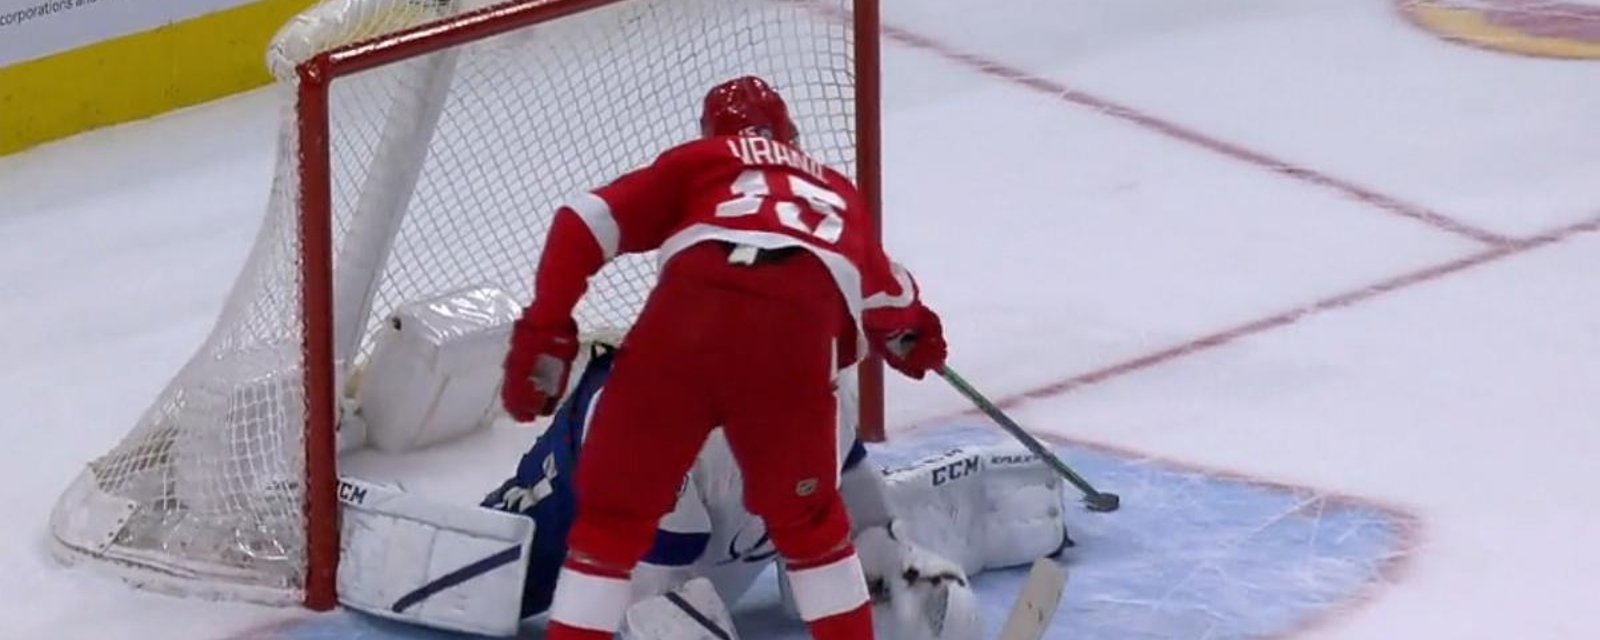 Jakub Vrana channels his inner Pavel Datsyuk to keep the Red Wings in it.